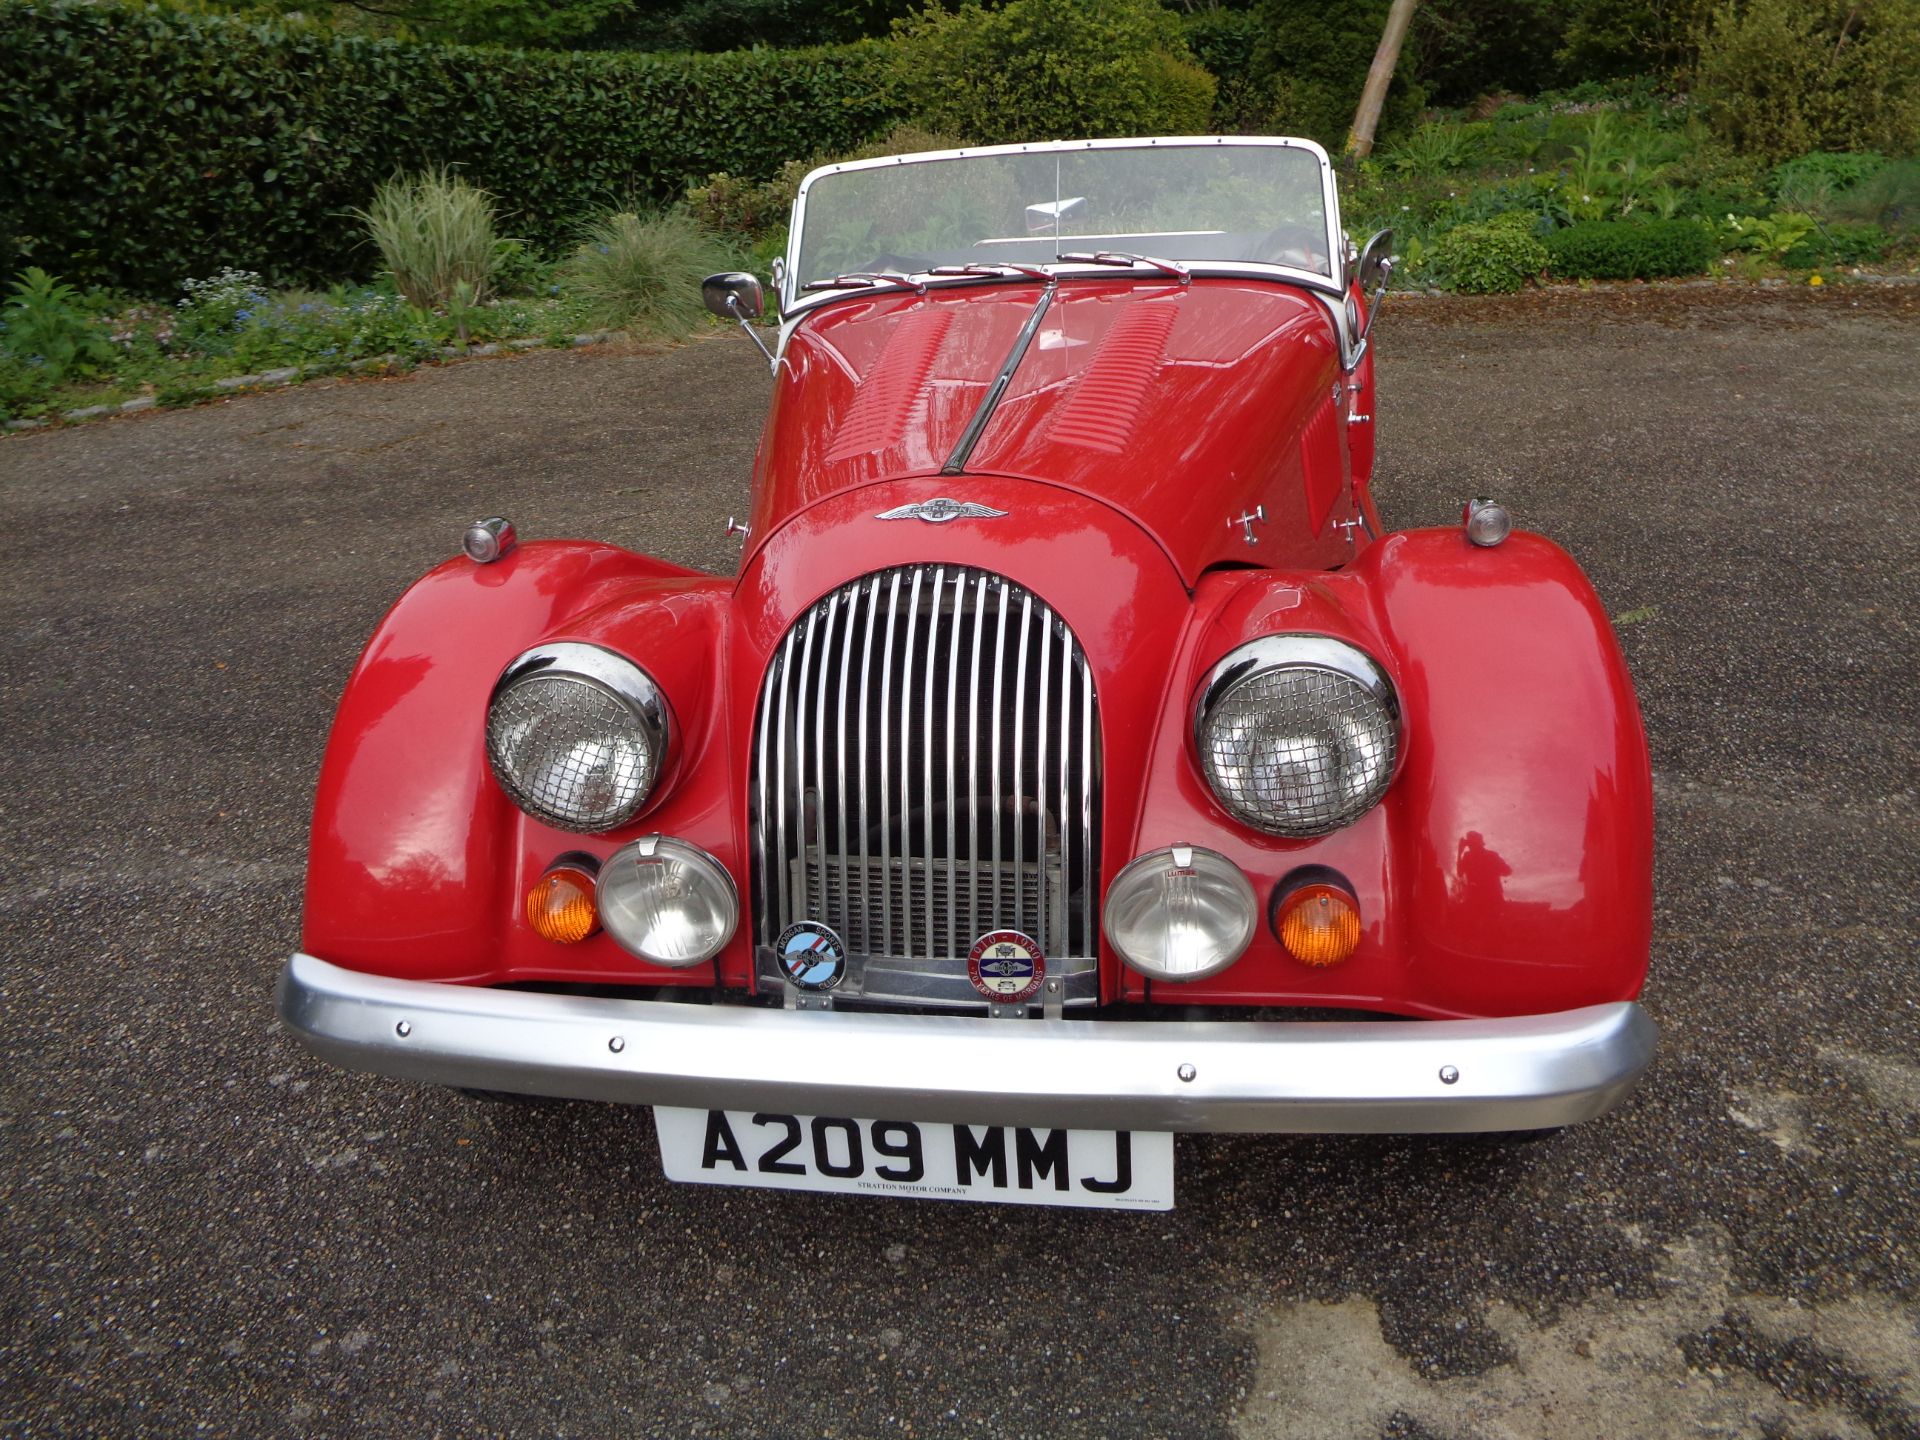 1983 Morgan 4/4 - Un-mistakable style for the British car enthusiast - A true gentleman’s car! - Image 3 of 19